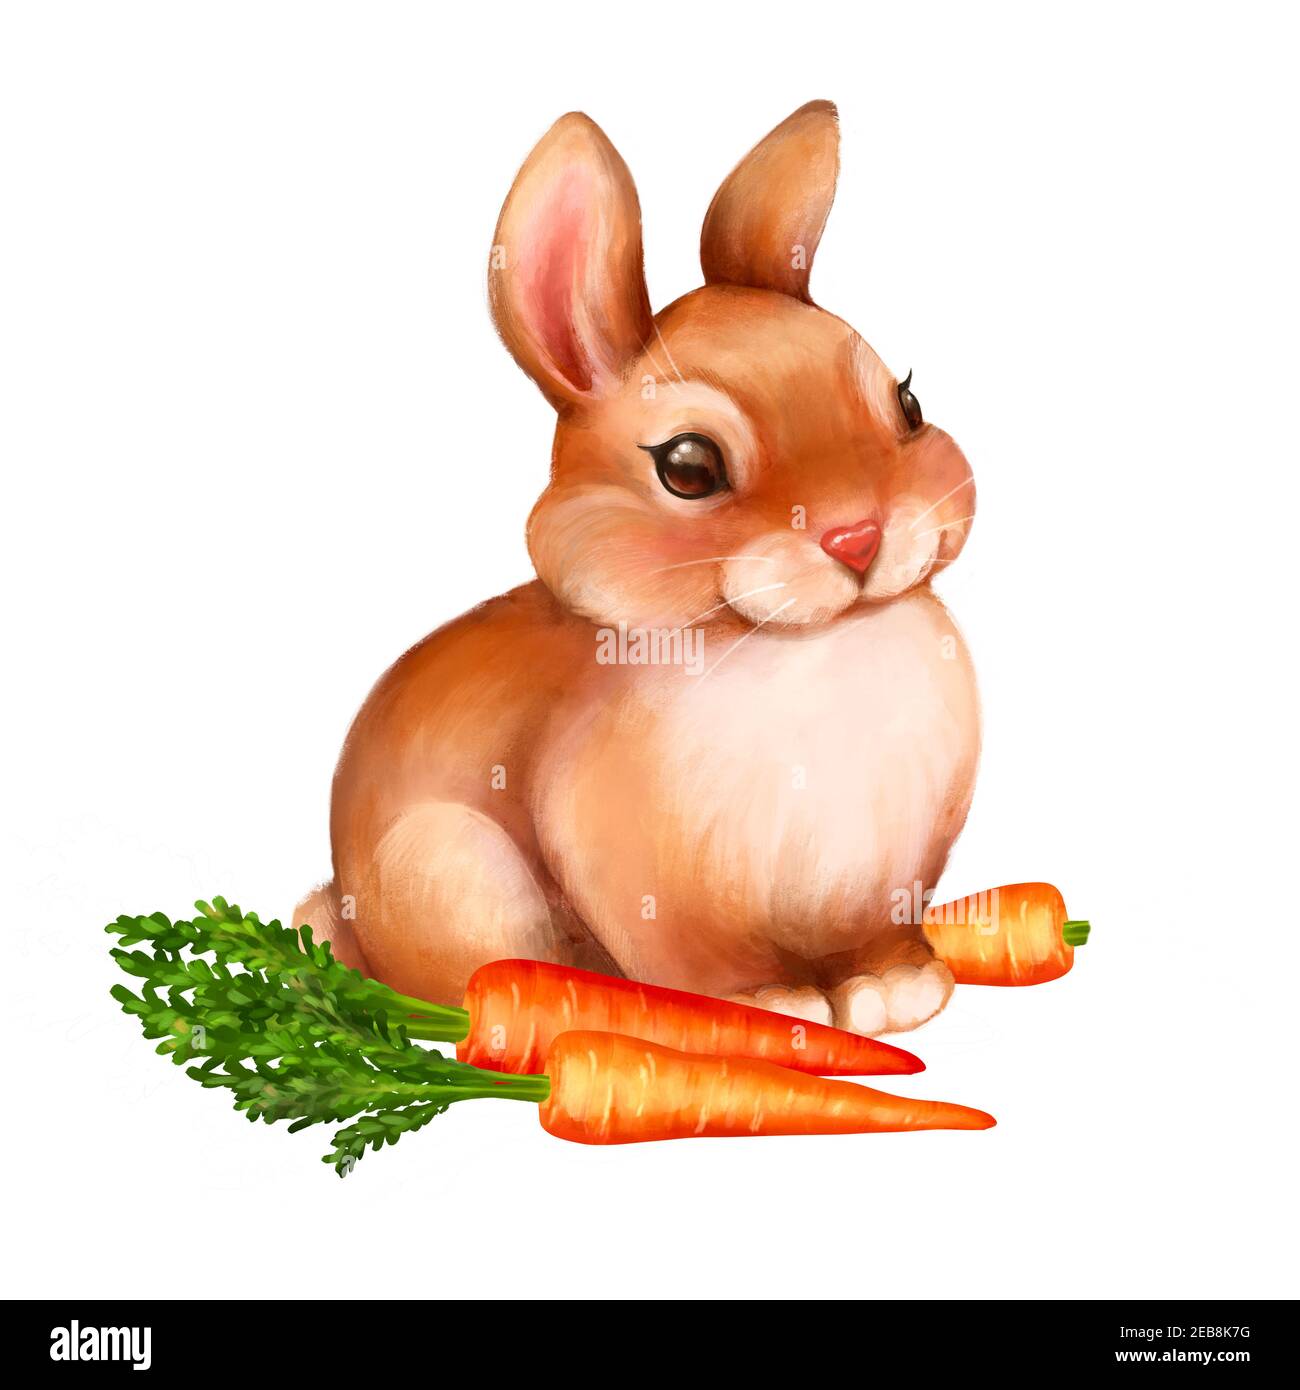 Rabbit and carrots. Cute easter illustration. Isolated on white Stock Photo